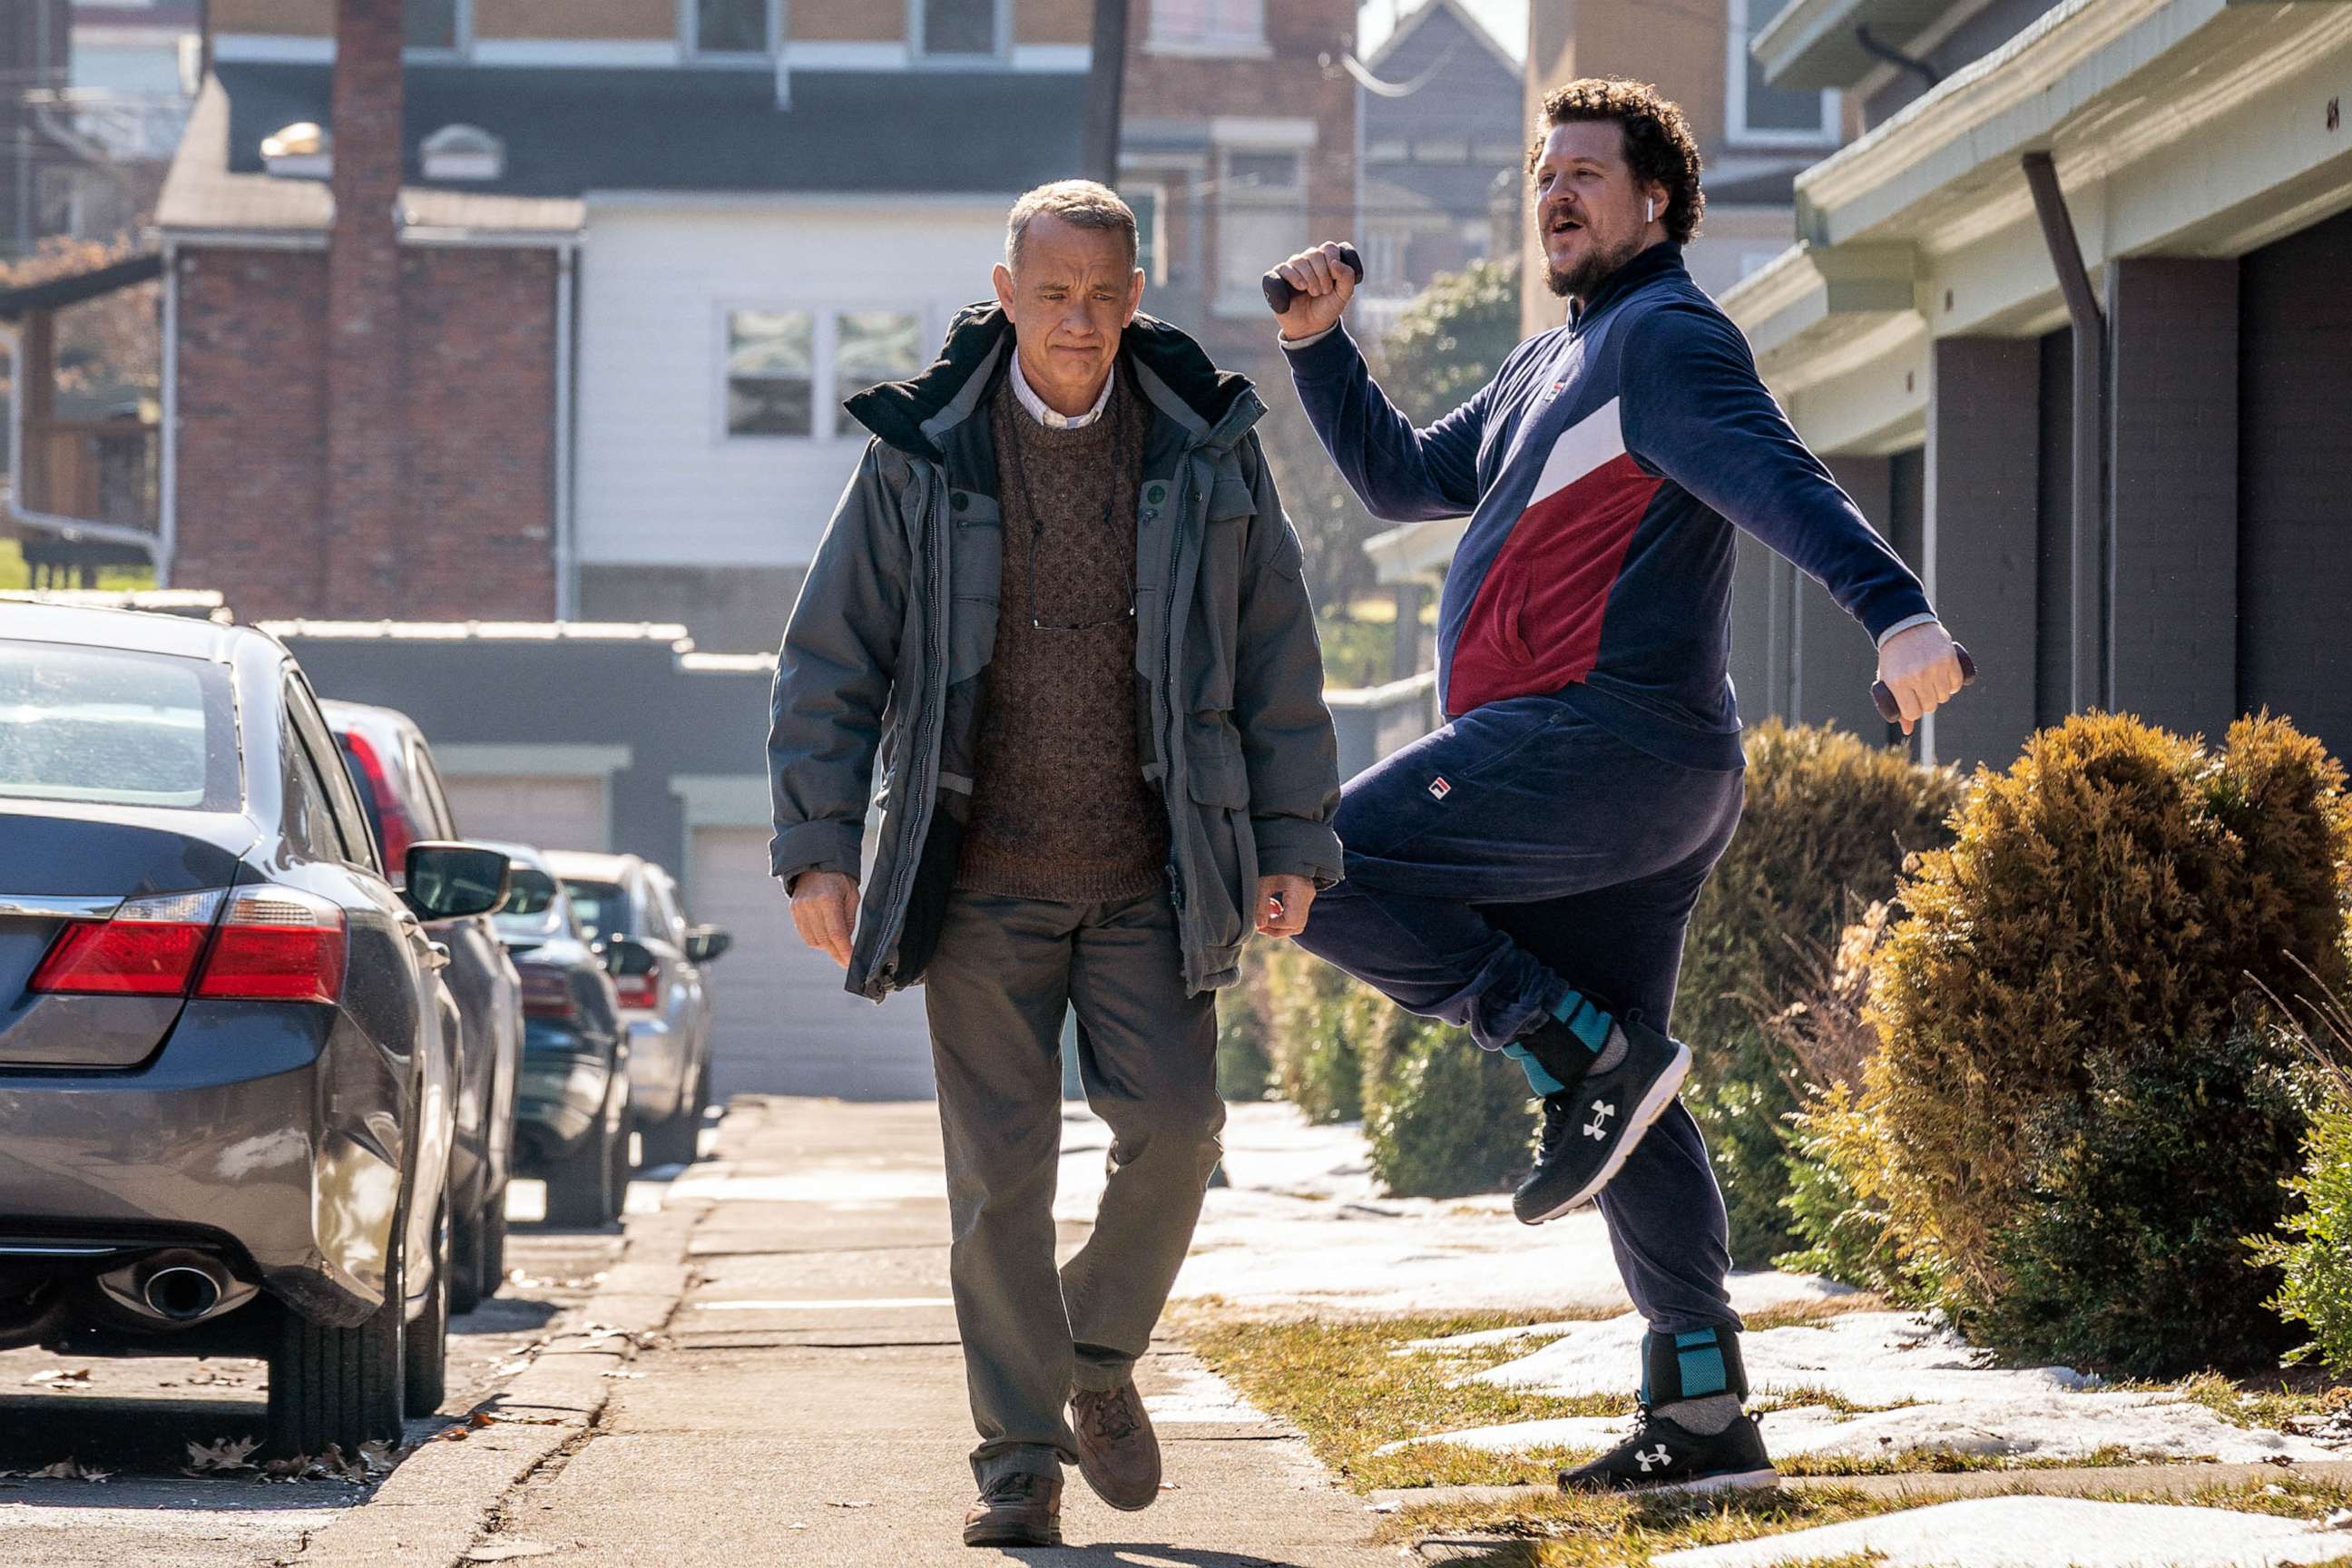 PHOTO: Jimmy, played by Cameron Britton, jogs by Otto, played by Tom Hanks, in Columbia Pictures' "A Man Called Otto."